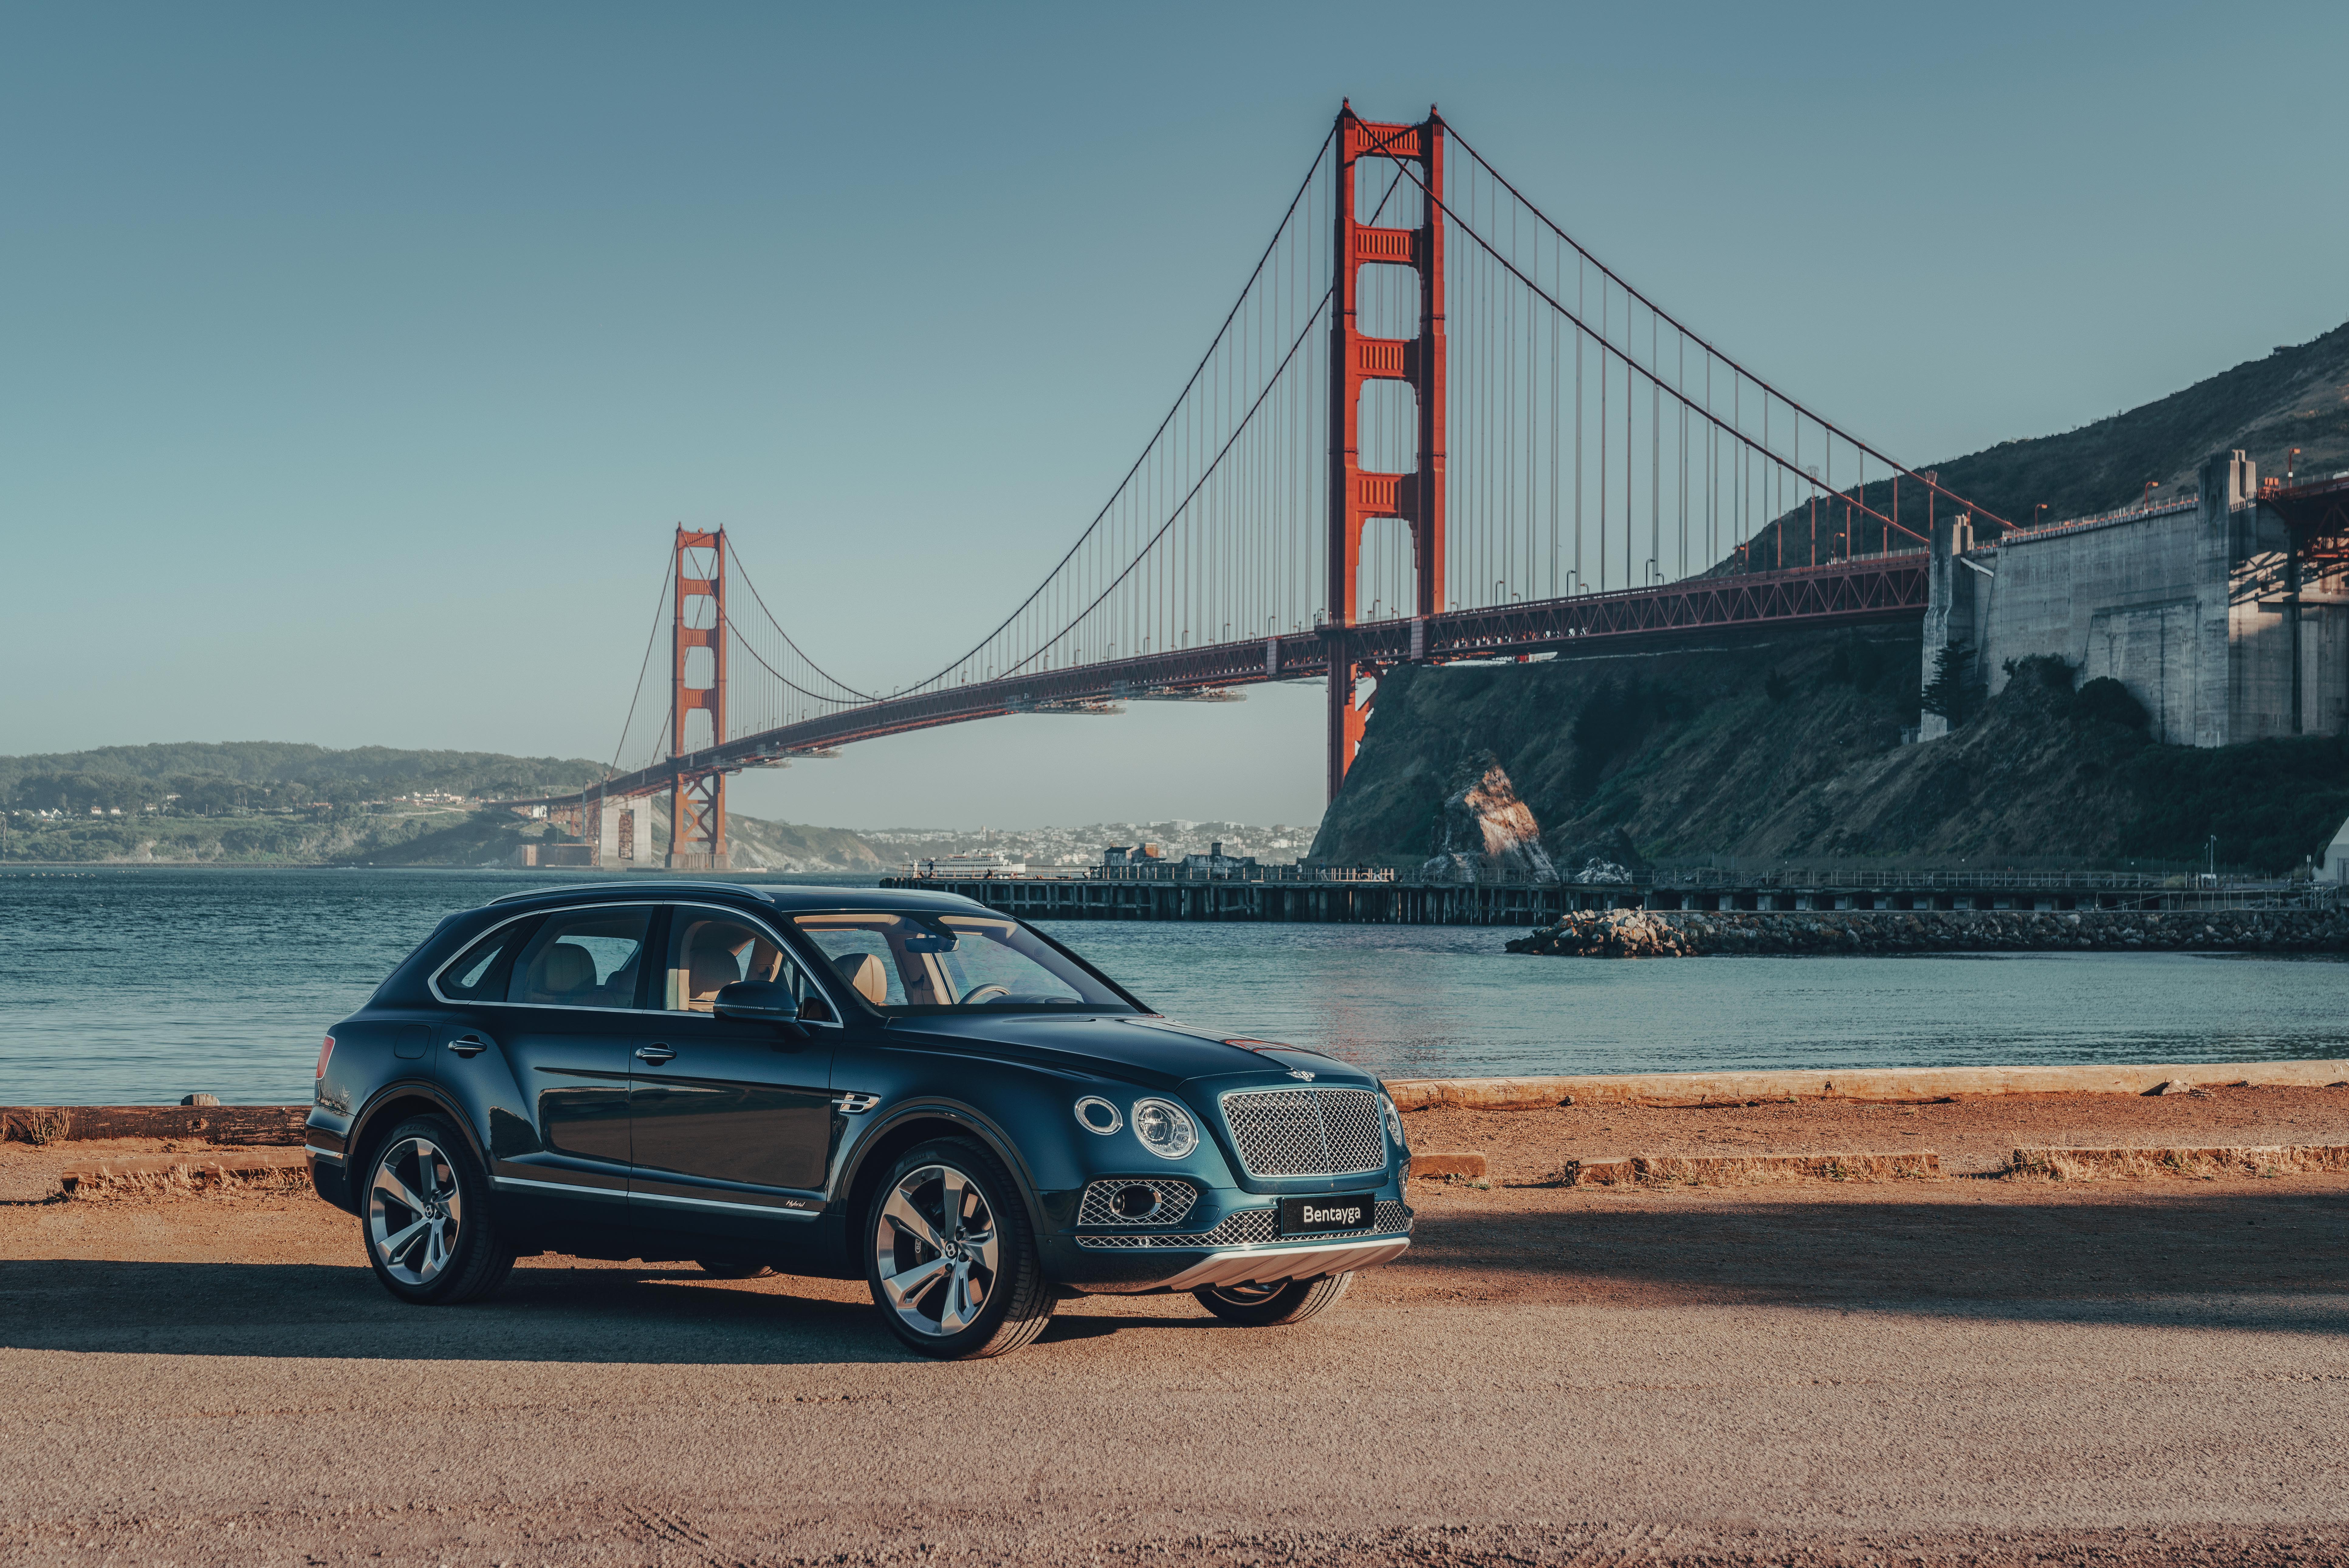 The Bentayga turns heads wherever it is